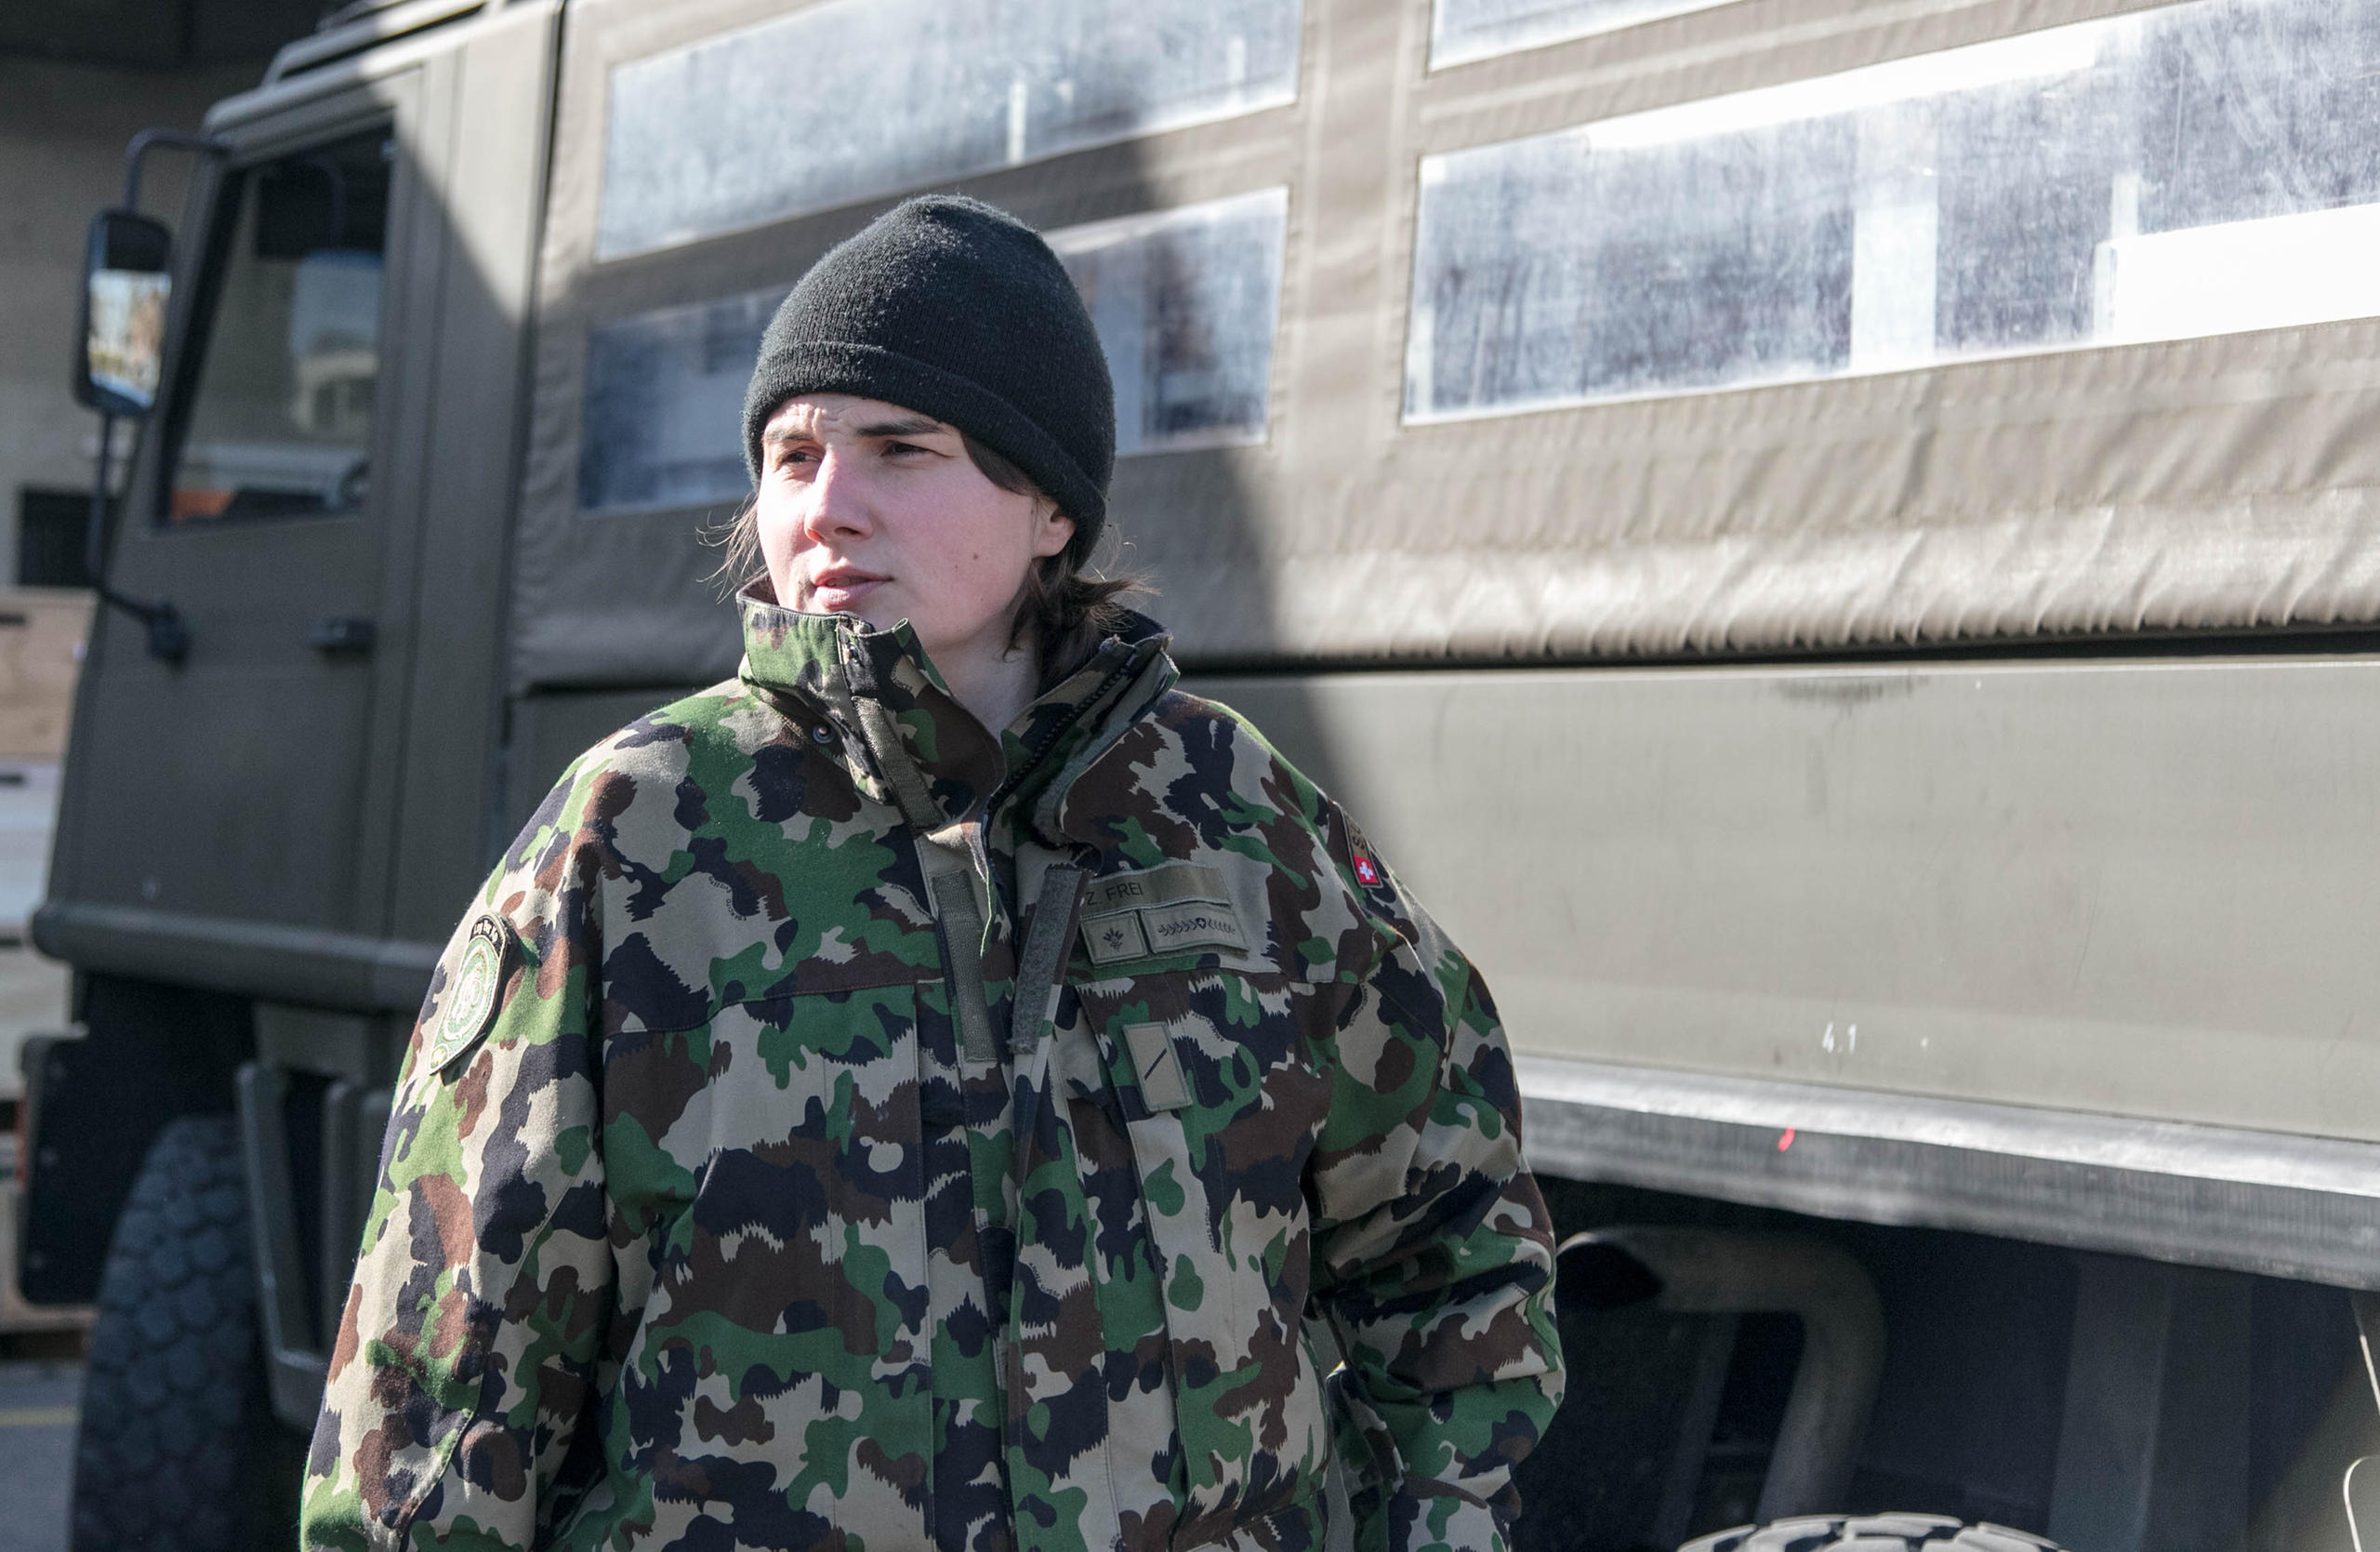 Private Zoé in front of a military vehicle